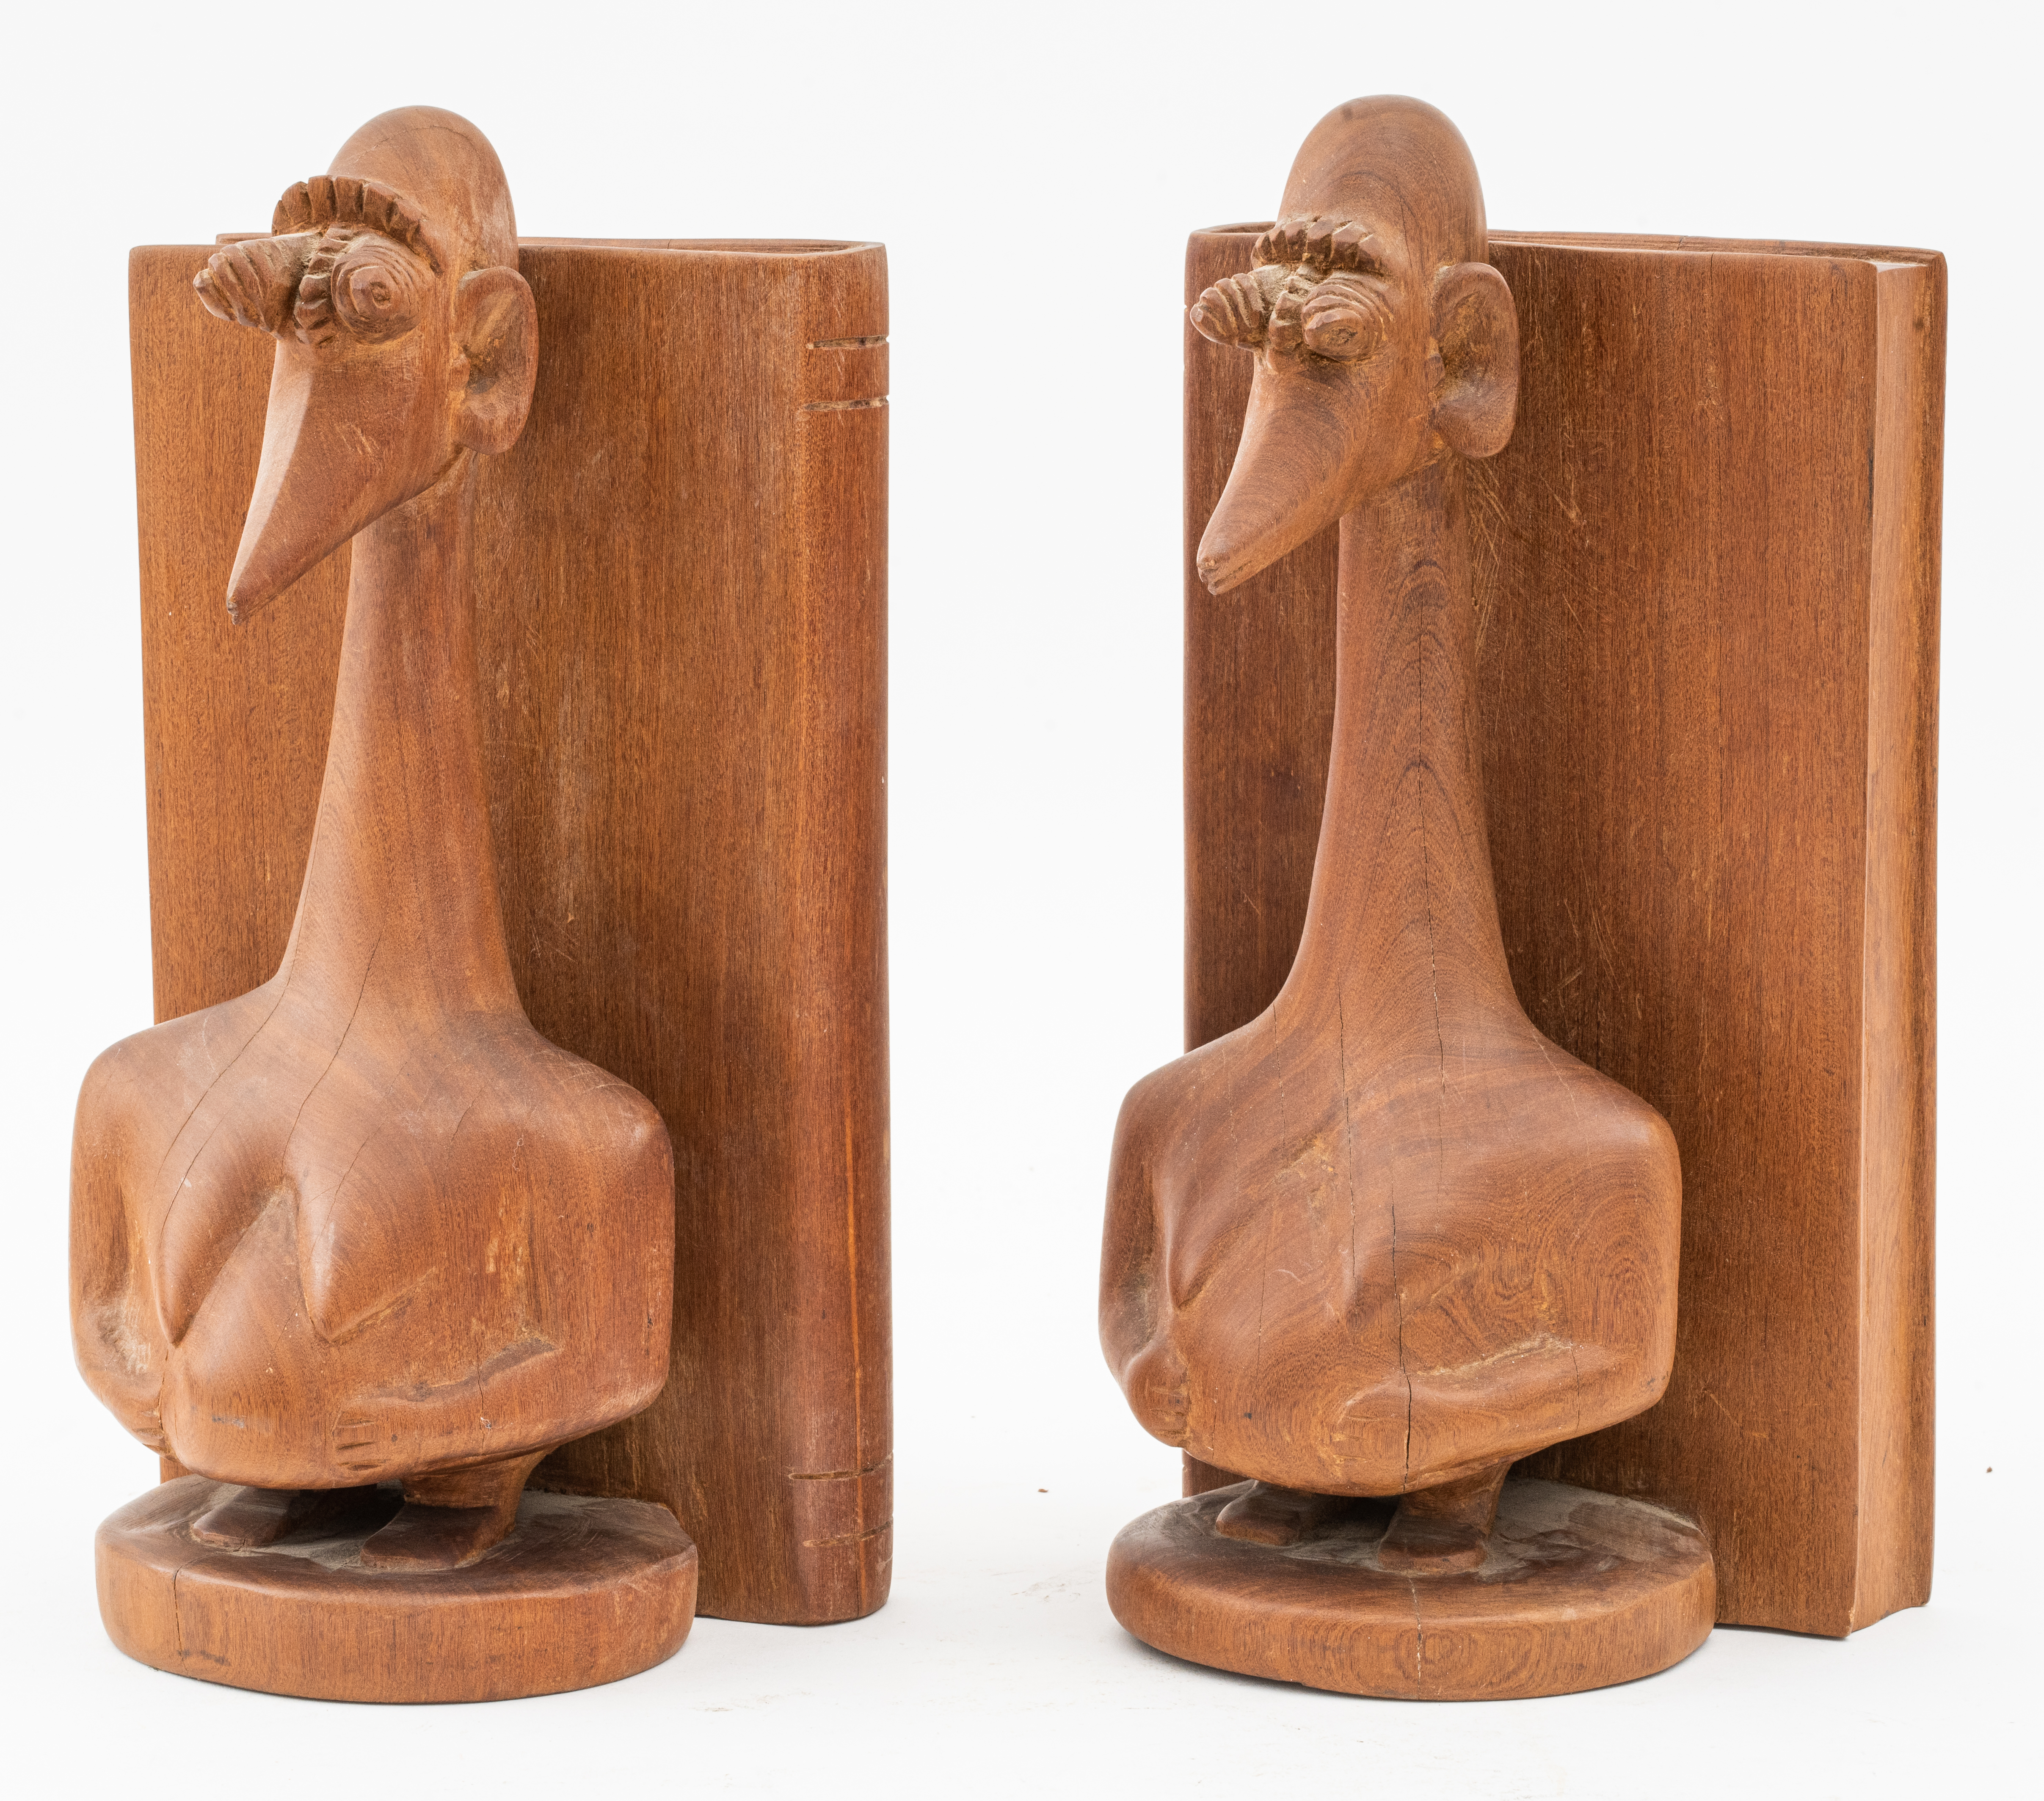 WHIMSICAL HAND CARVED WOODEN BOOKENDS  363beb